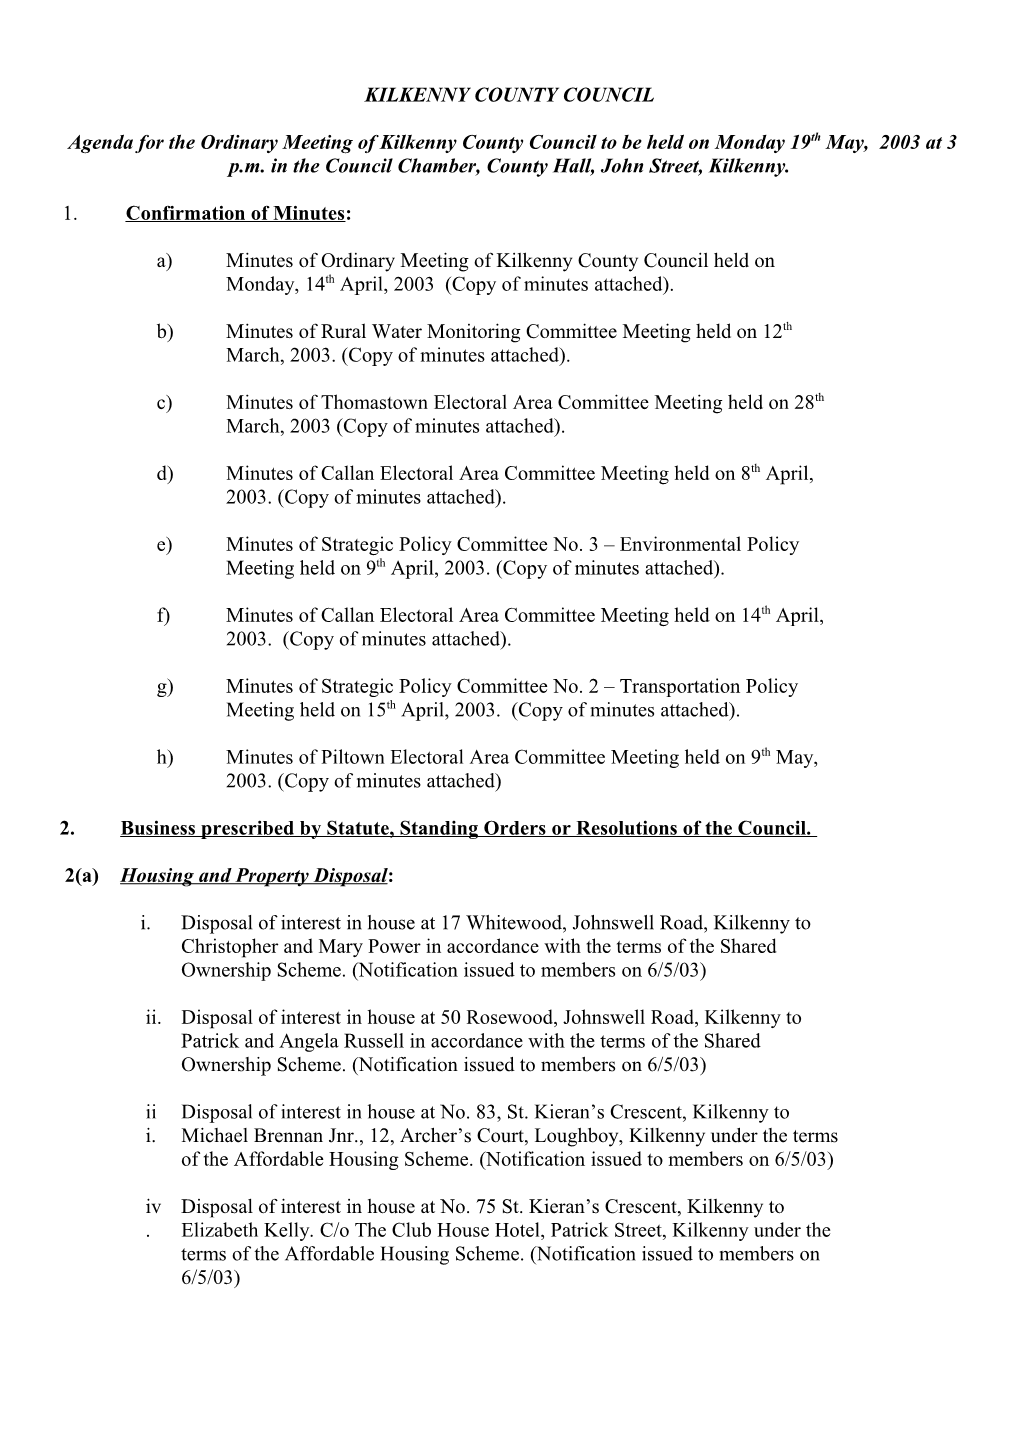 Agenda for the Ordinary Meeting of Kilkenny County Council to Be Held on Monday 19Th May